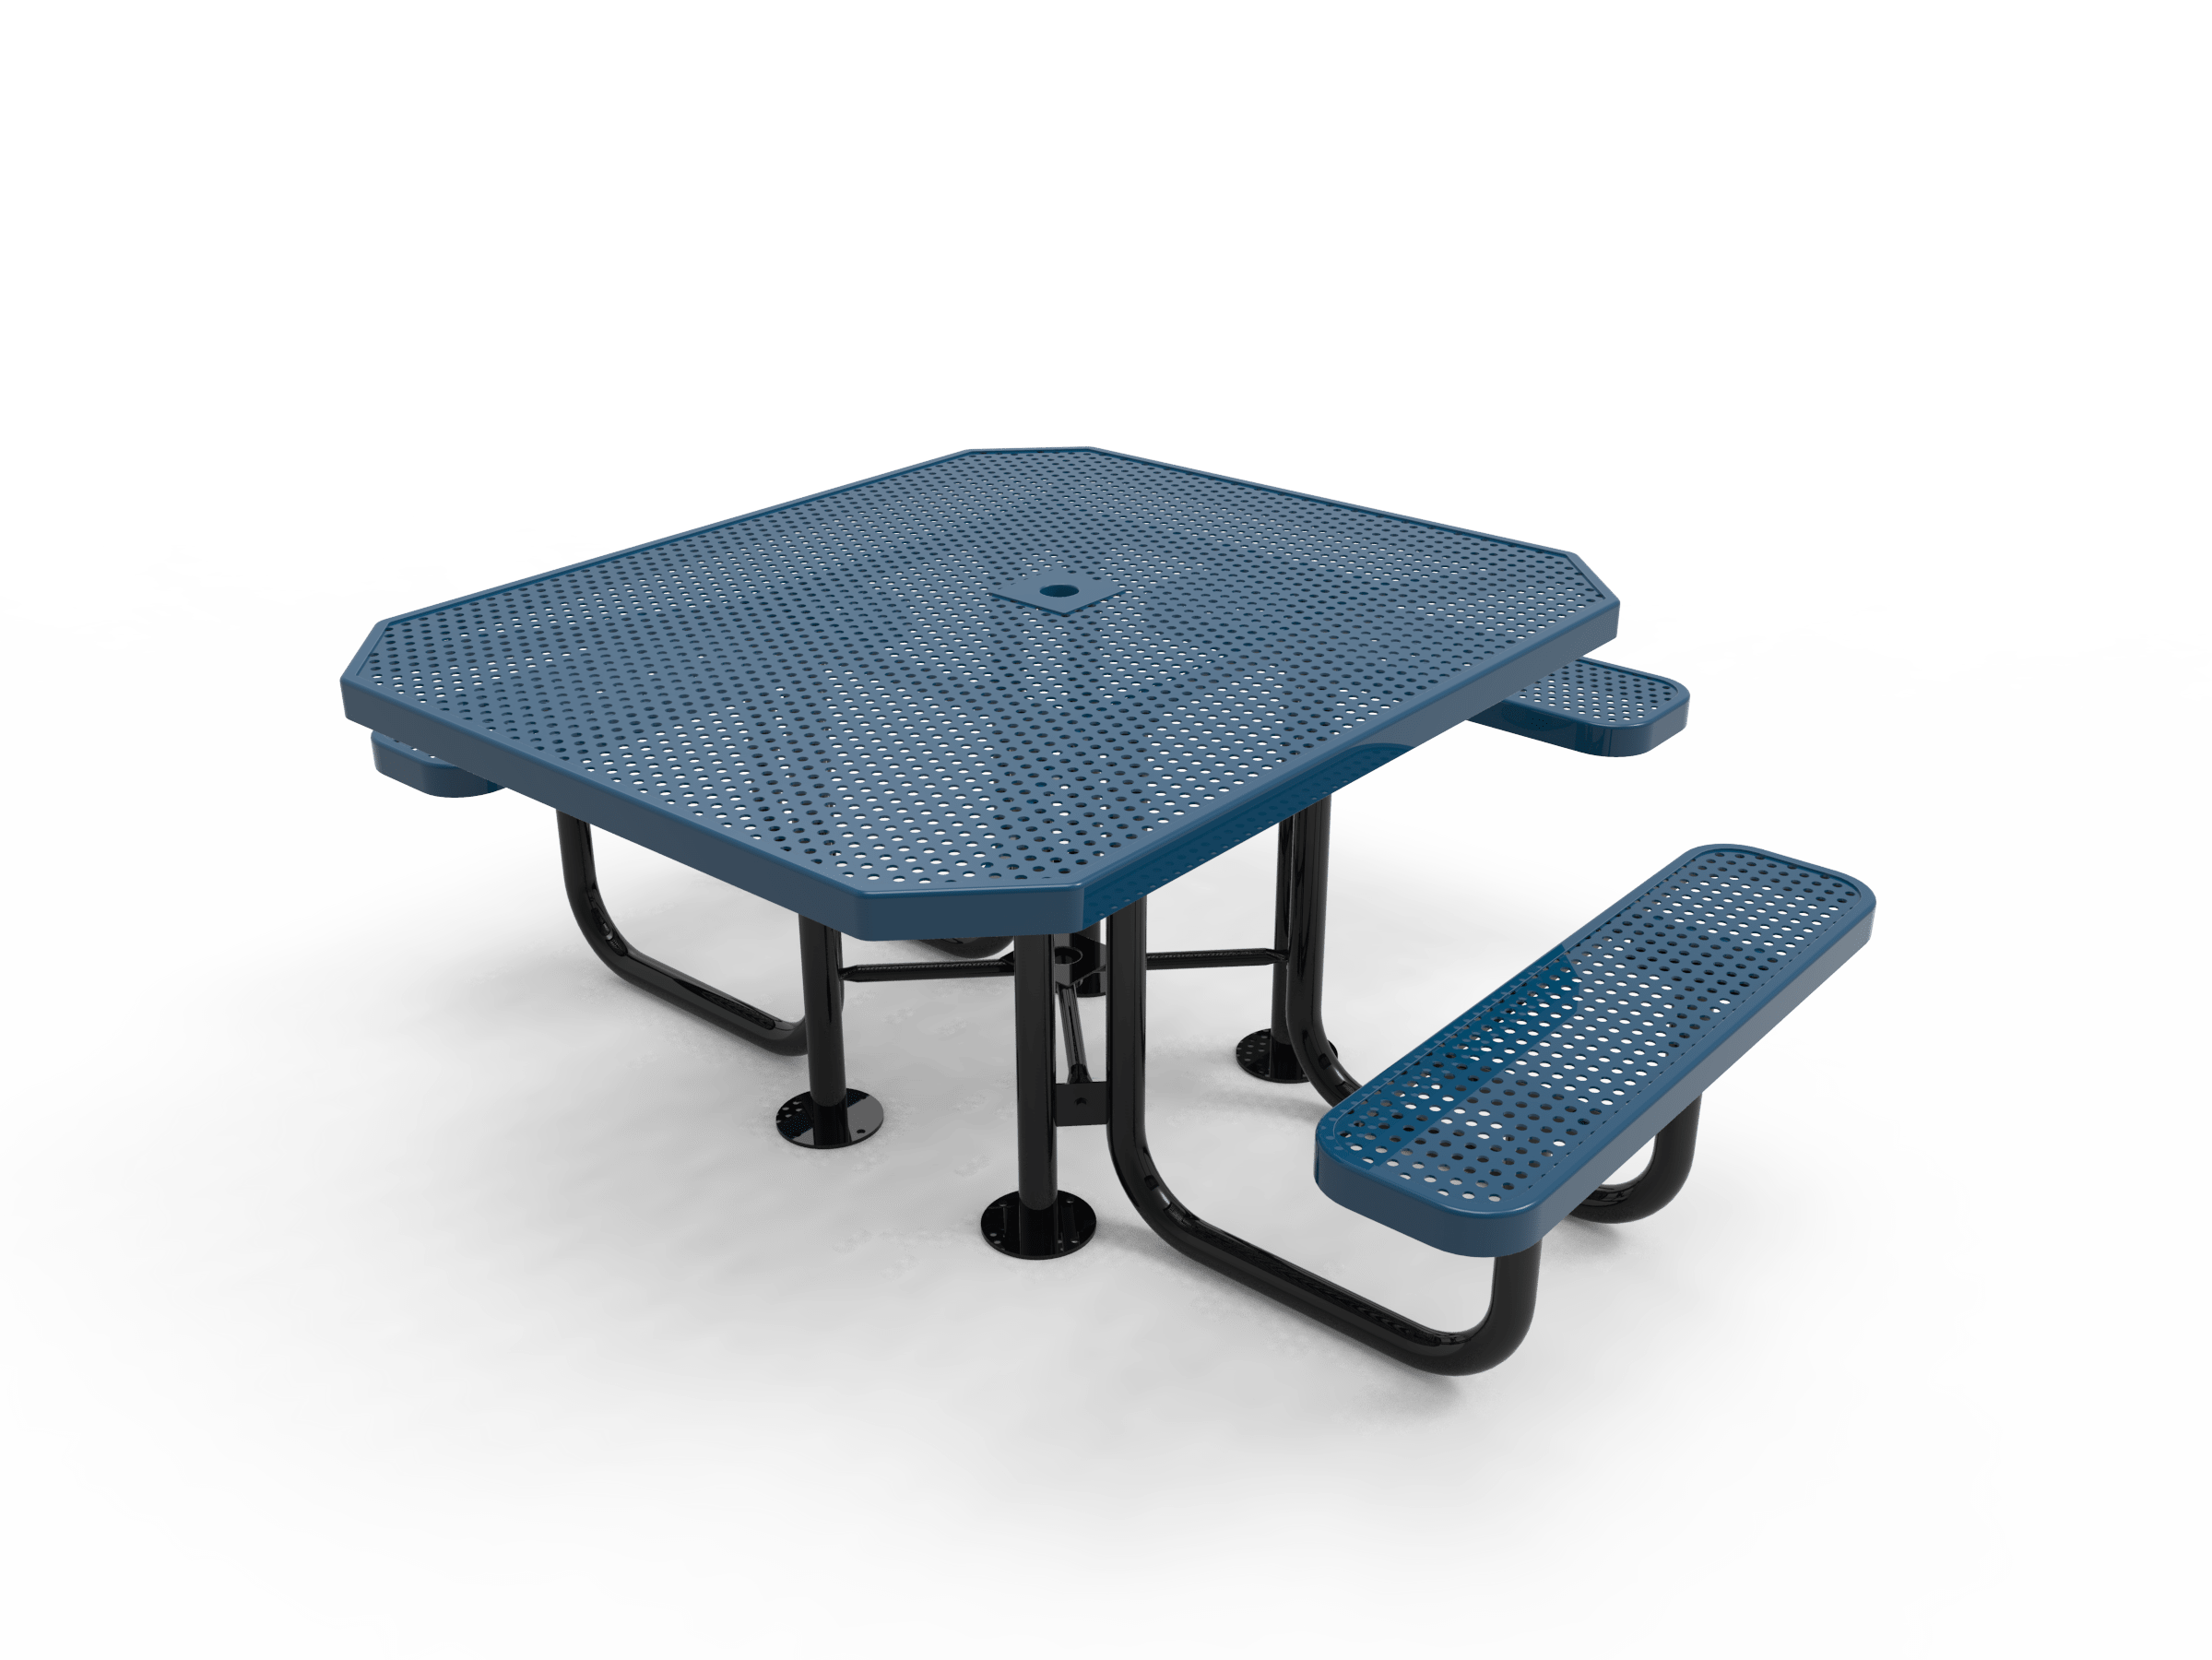 46″ Oct Picnic Table 3 Seat-Punched
TOT46-D-04-013
Industry Standard Finish
$1469.00
TOT46-B-04-013
Advantage Premium Finish
$1769.00
